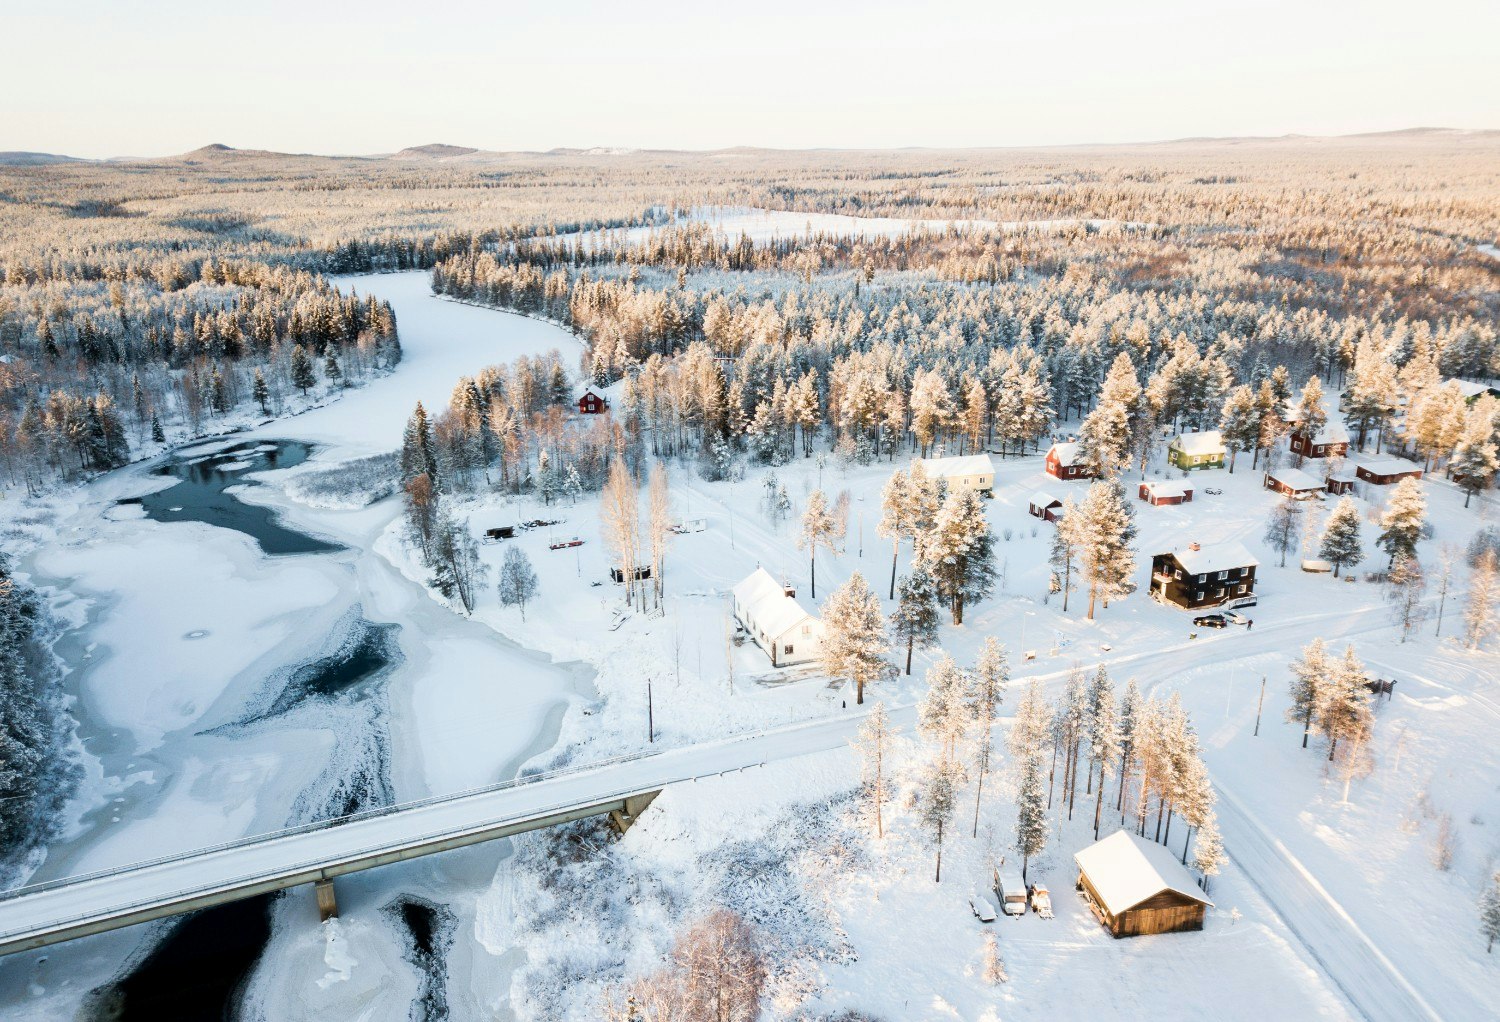 An aerial view of the Artic Landscape